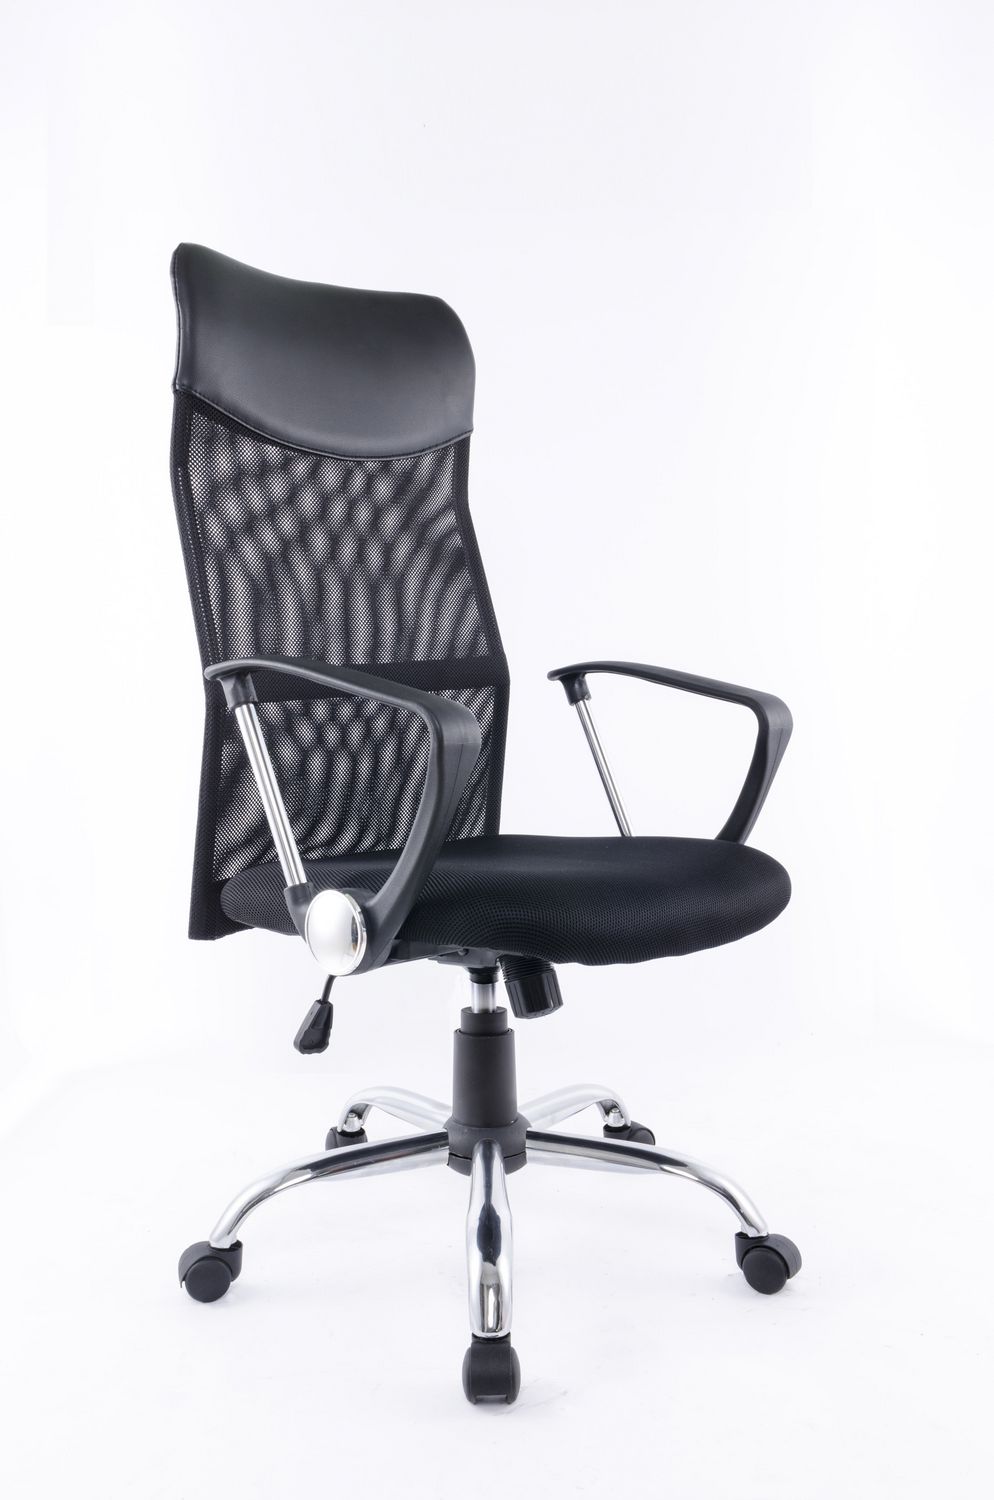 New Office Chair Black Friday Office Depot for Living room